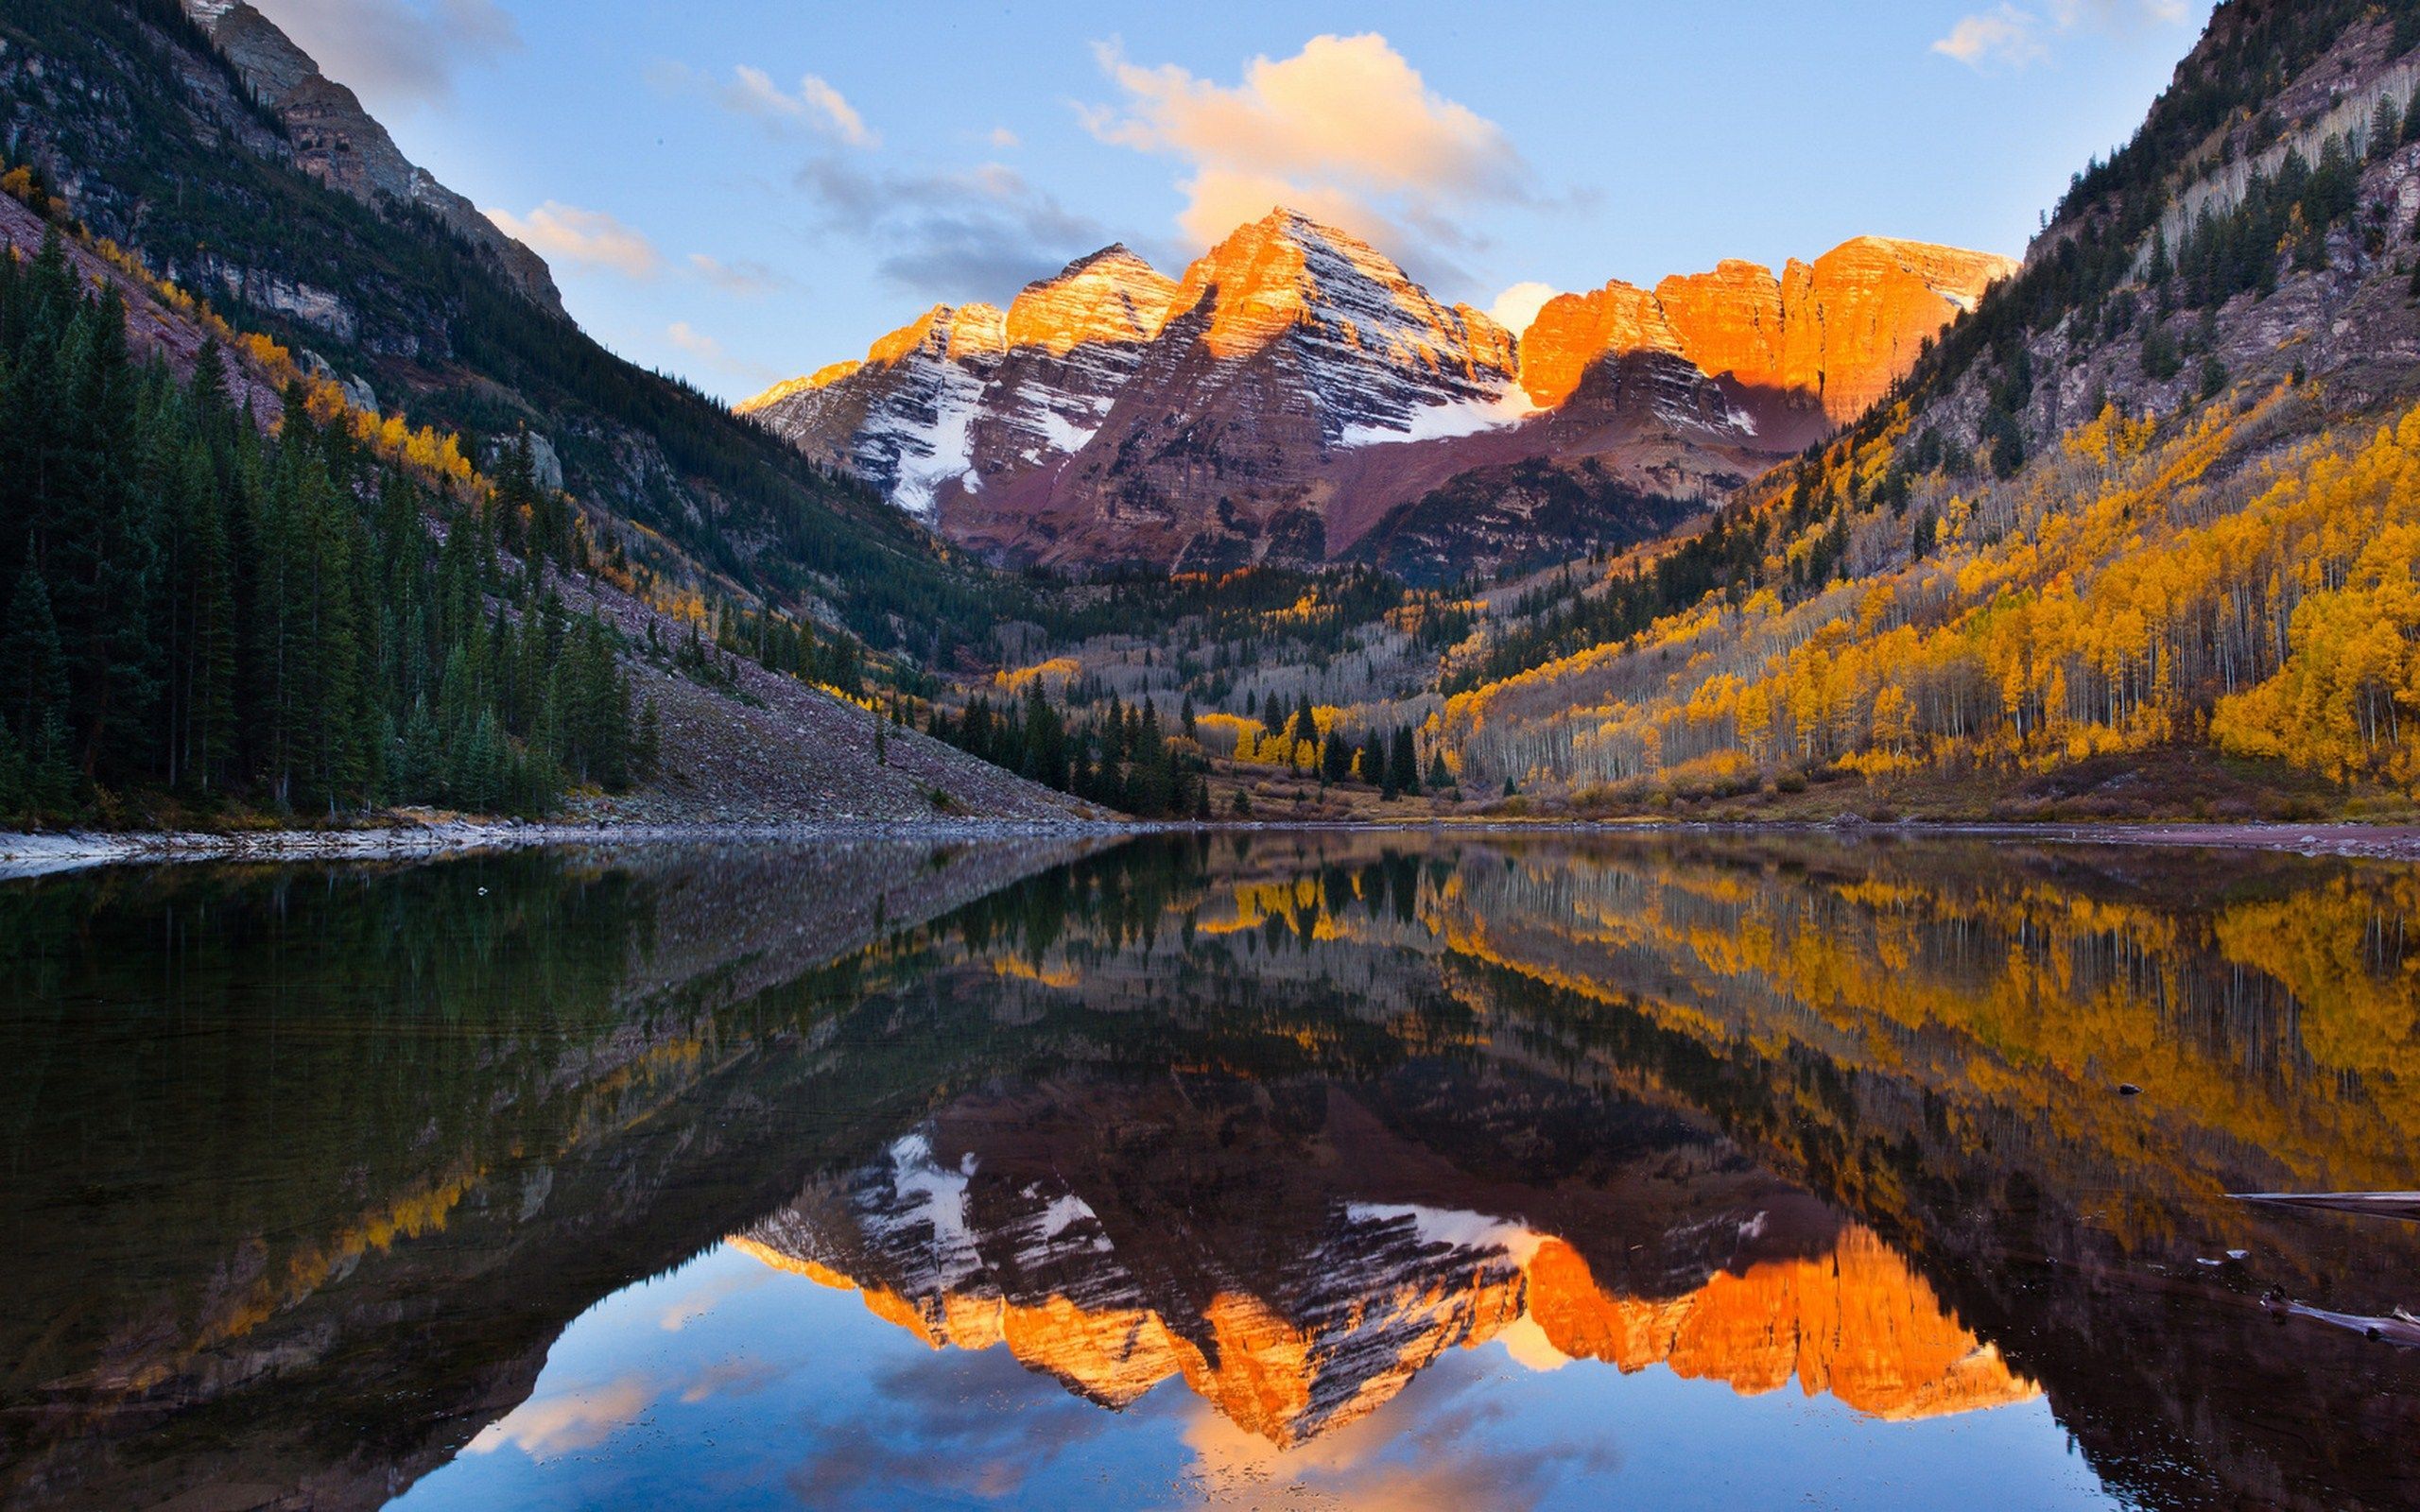 Maroon Bells and Crater lake HD wallpaper. Water reflection photography, Sunrise picture, Beautiful nature wallpaper